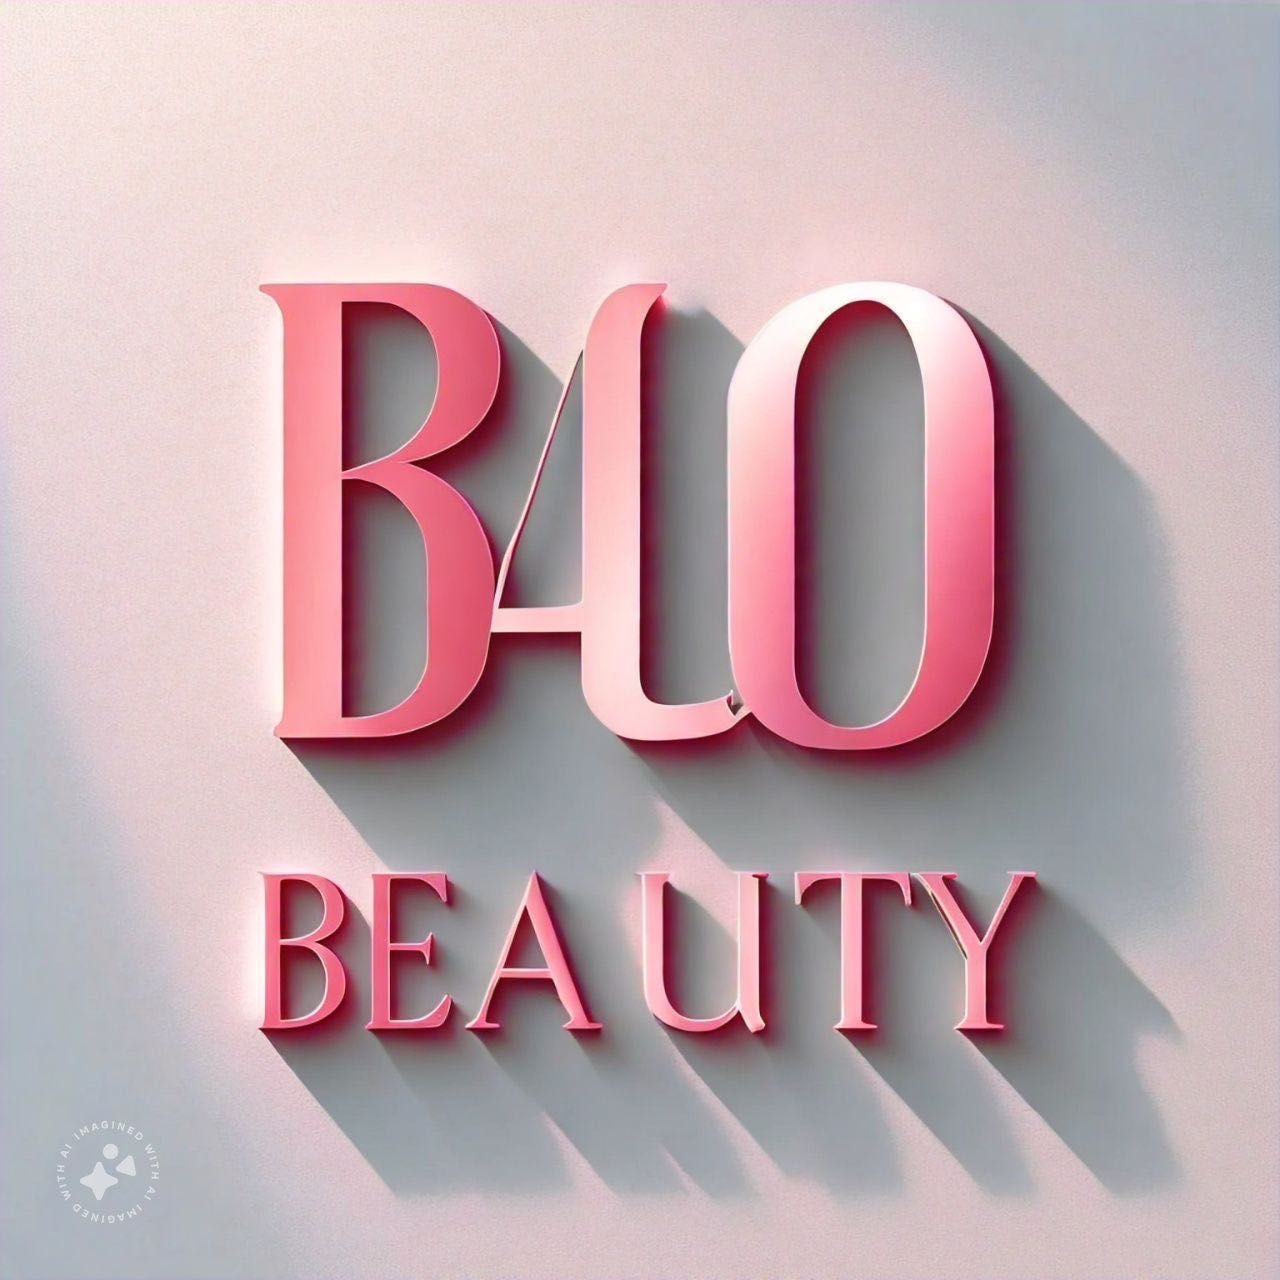 Balo Beauty, 3428 N Riley Ave, Indianapolis, 46218